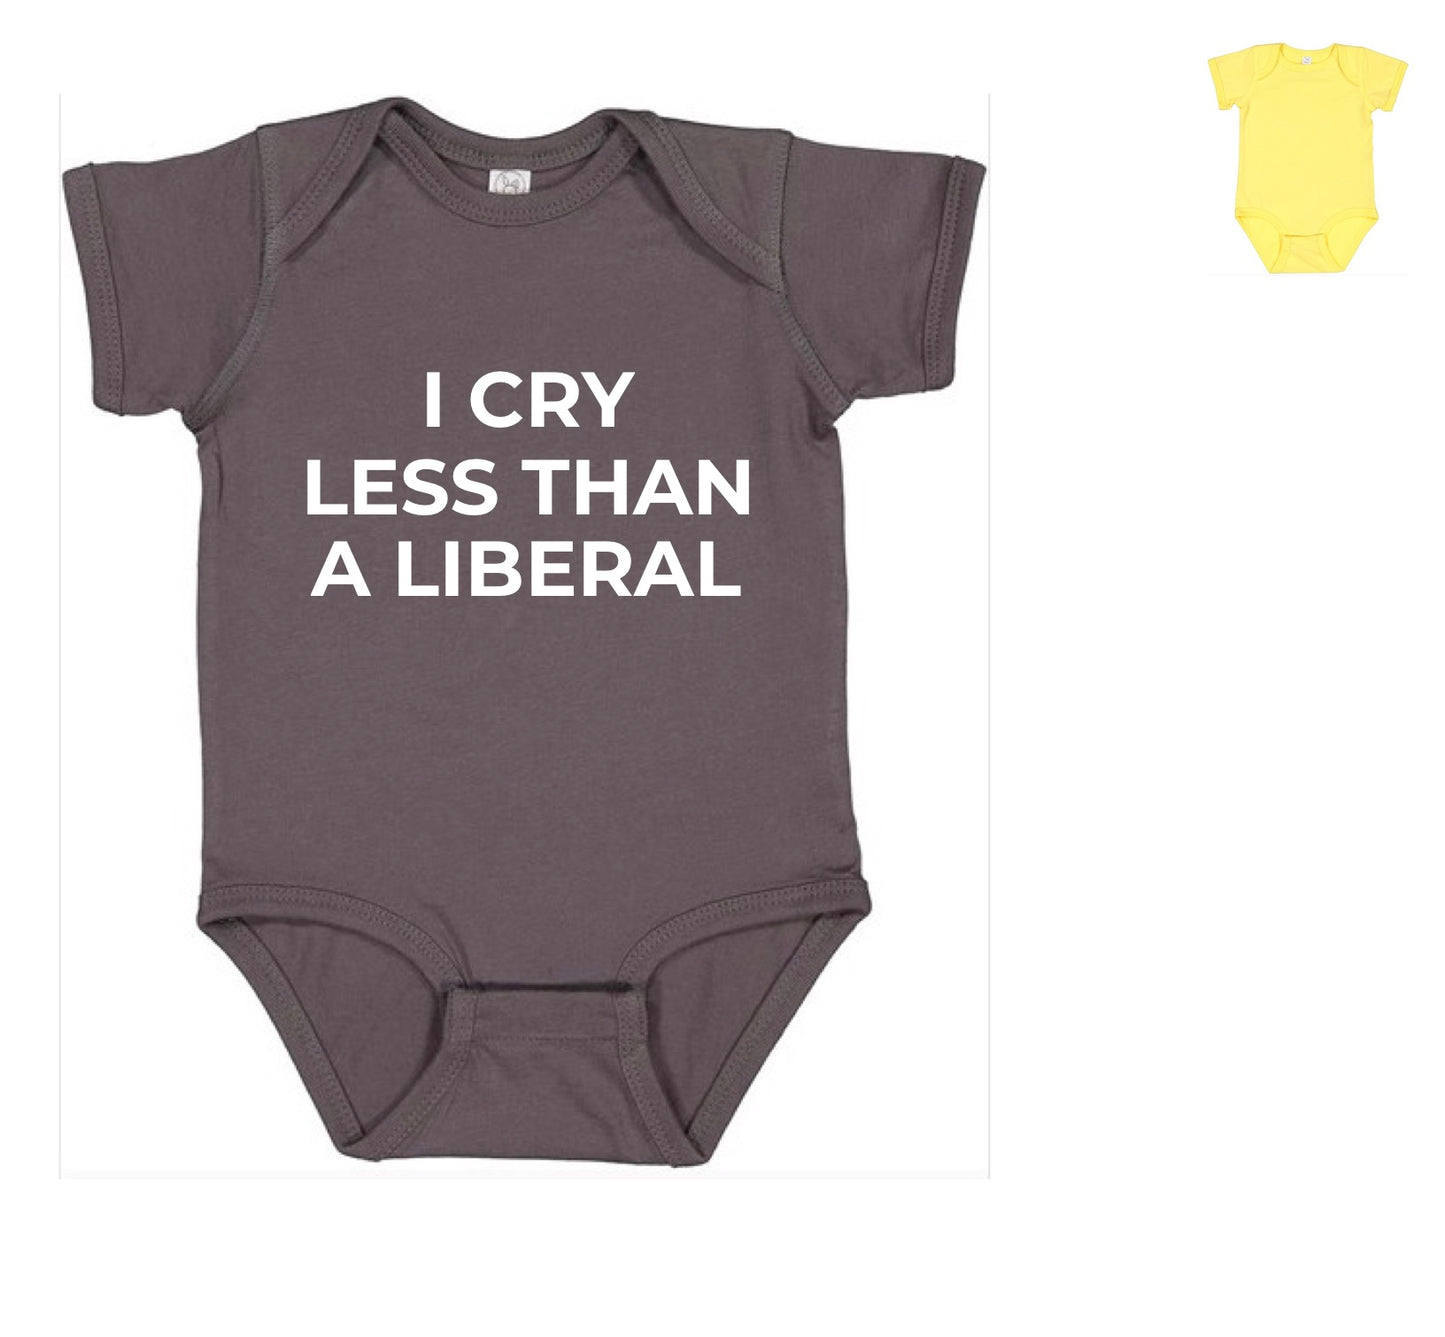 I Cry Less Than A Liberal Onesie (FREE Shipping)